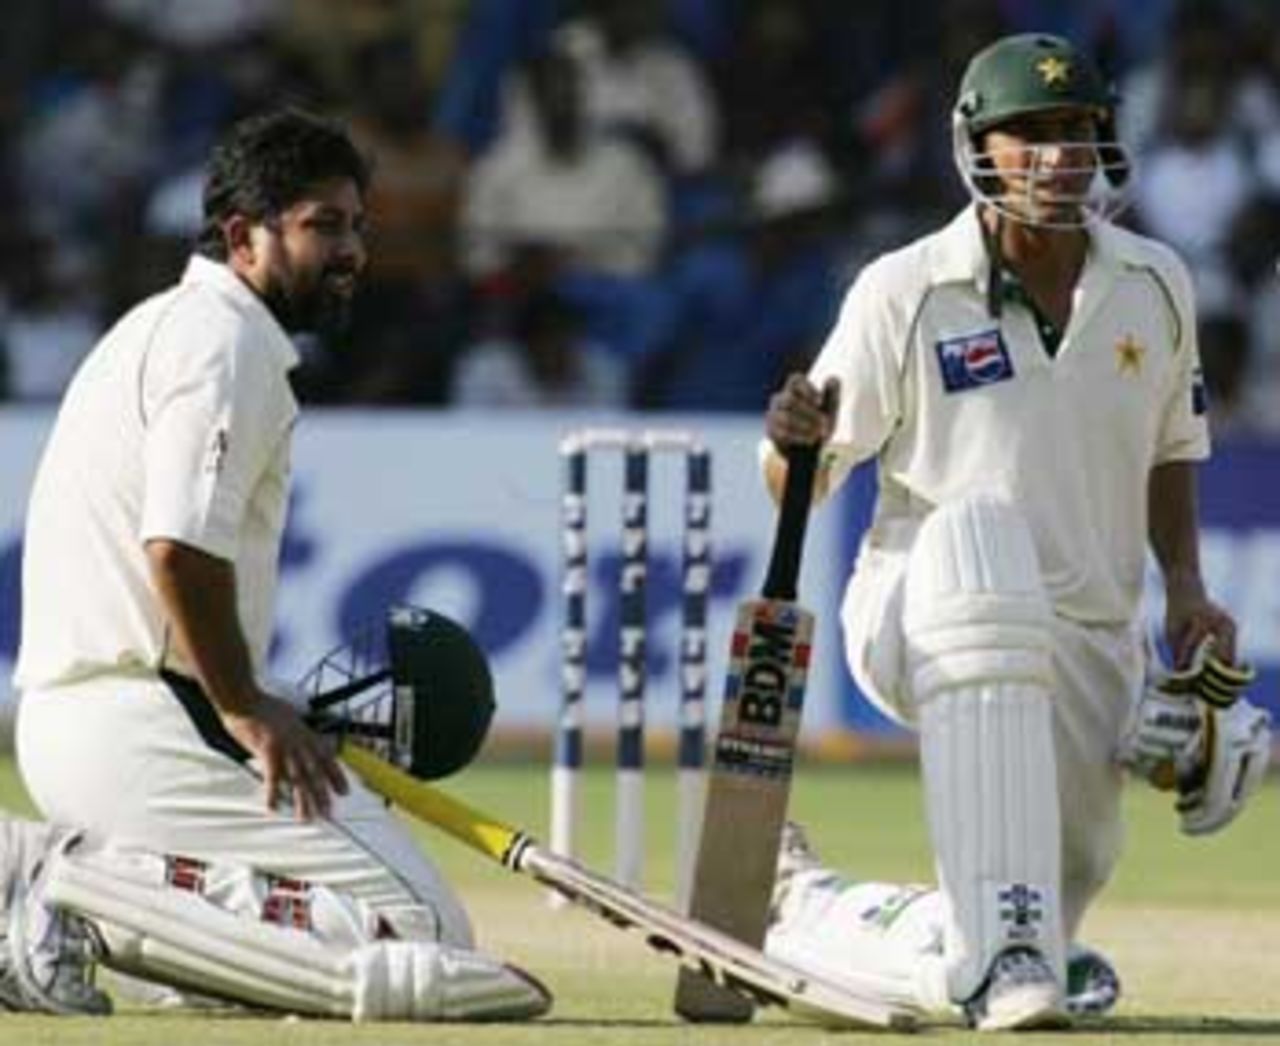 Younis Khan and Inzamam-ul-Haq paced their partnership well, taking a breather when possible, India v Pakistan, 3rd Test, Bangalore, 1st day, March 24, 2005